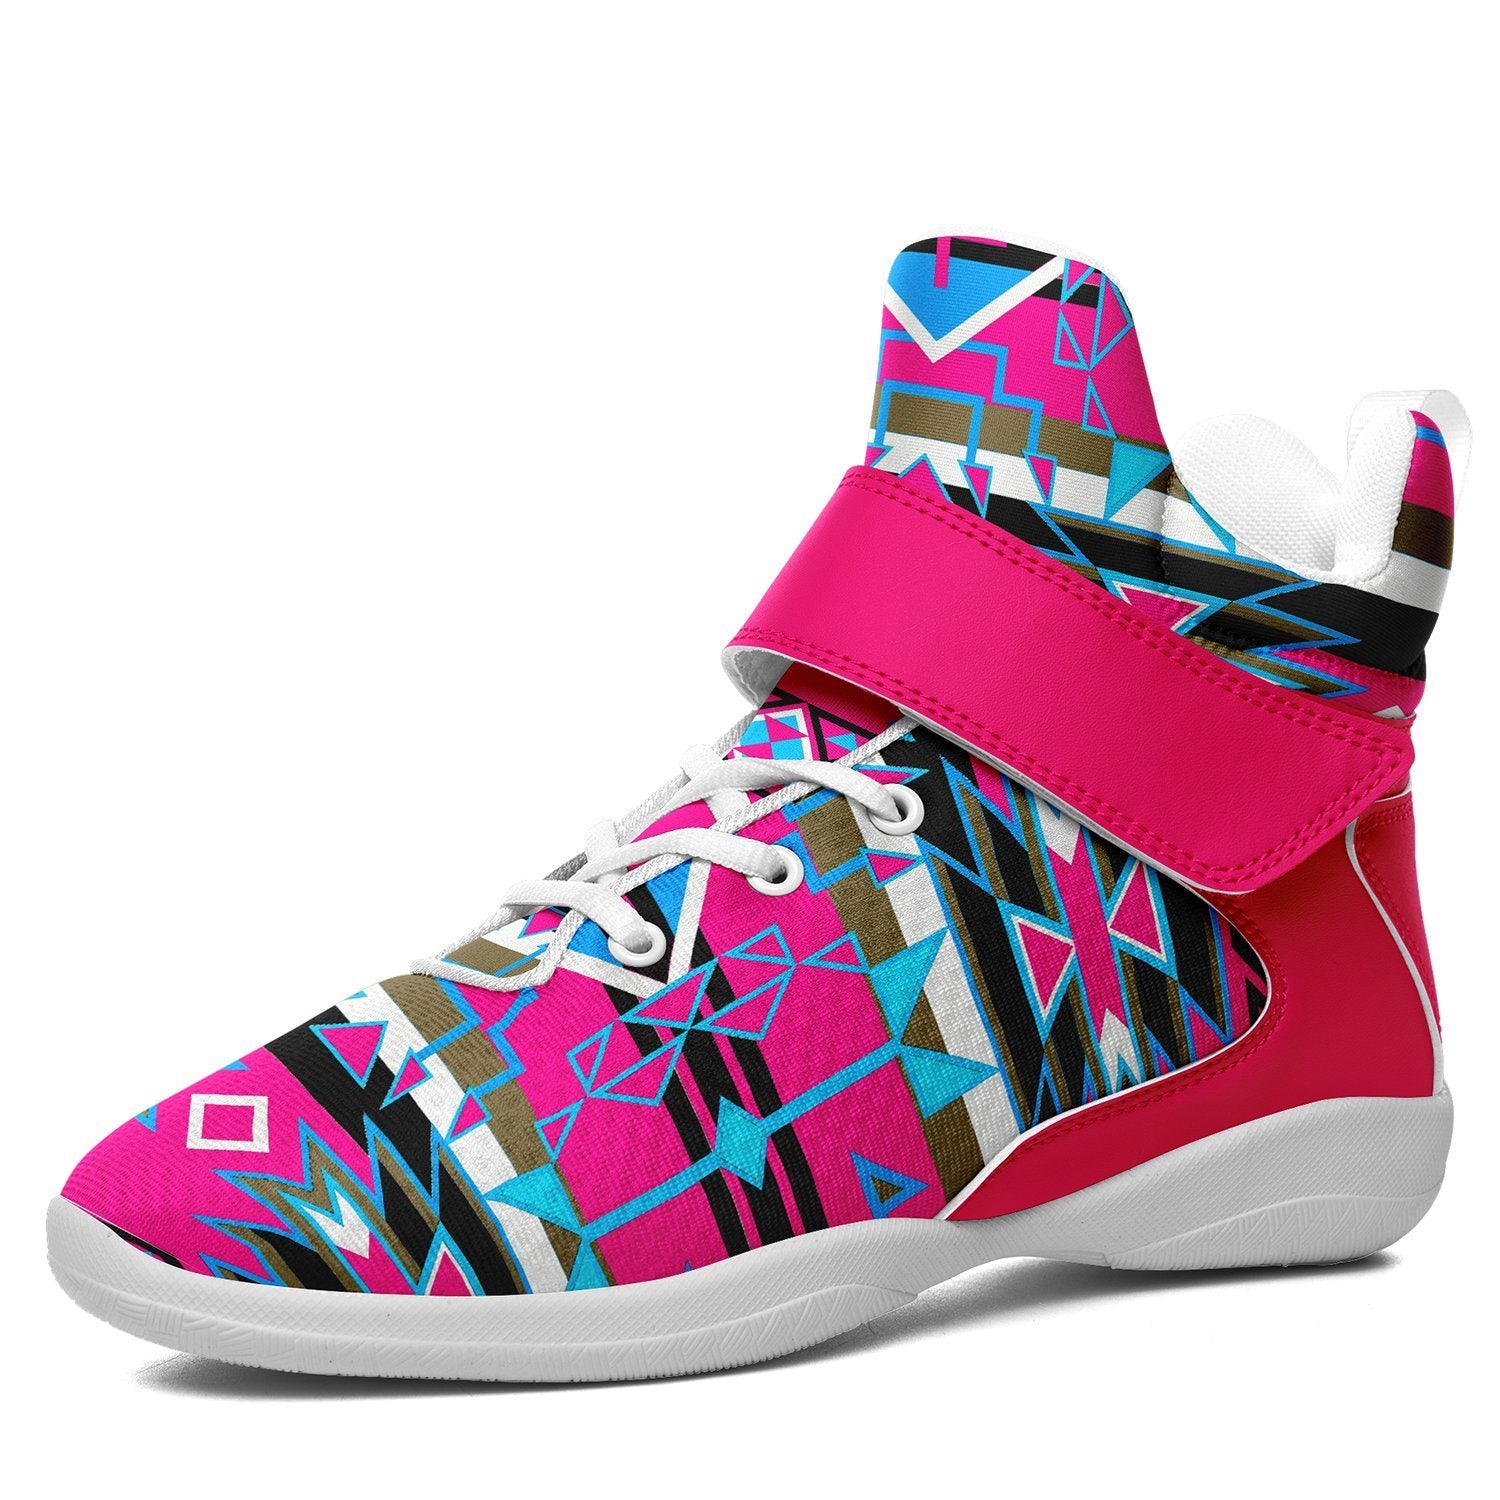 Force of Nature Sunset Storm Ipottaa Basketball / Sport High Top Shoes 49 Dzine US Women 4.5 / US Youth 3.5 / EUR 35 White Sole with Pink Strap 